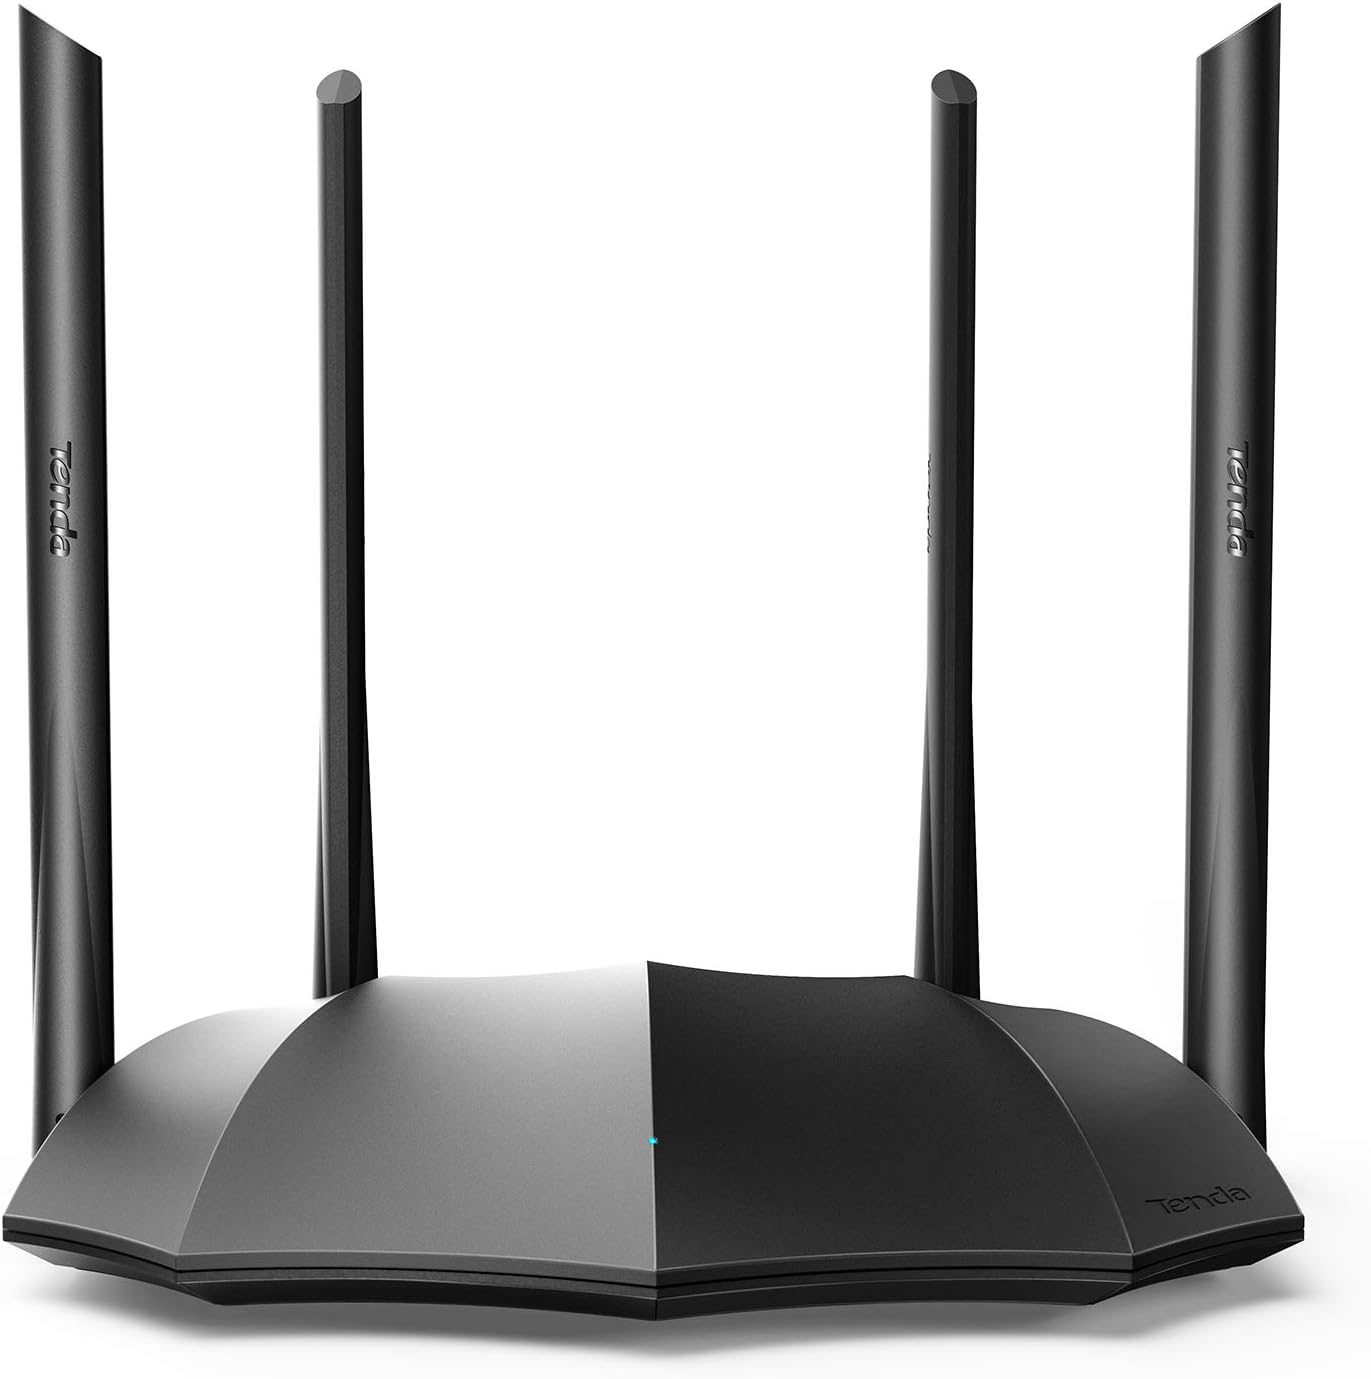 Tenda AC8 AC1200 MU-MIMO Wireless Gigabit Router, Wi-Fi speed up to 867Mbps/5G + 300Mbps/2.4G, 4 Gigabit Ports, Supports Parental Control, APP management, Guest Wi-Fi, IPV6